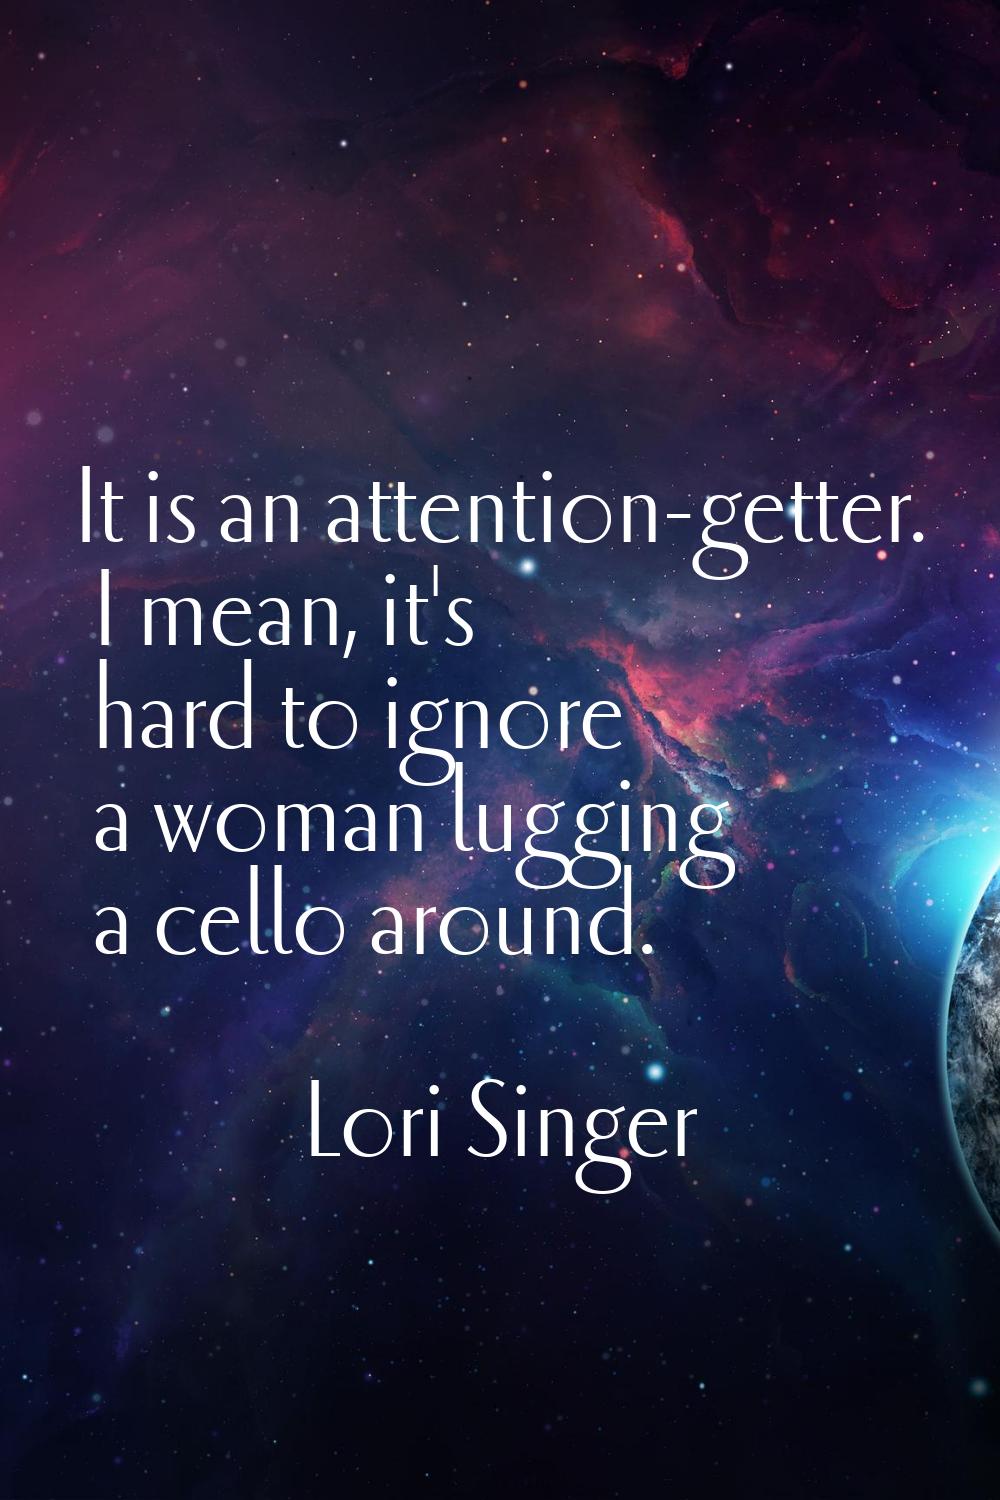 It is an attention-getter. I mean, it's hard to ignore a woman lugging a cello around.